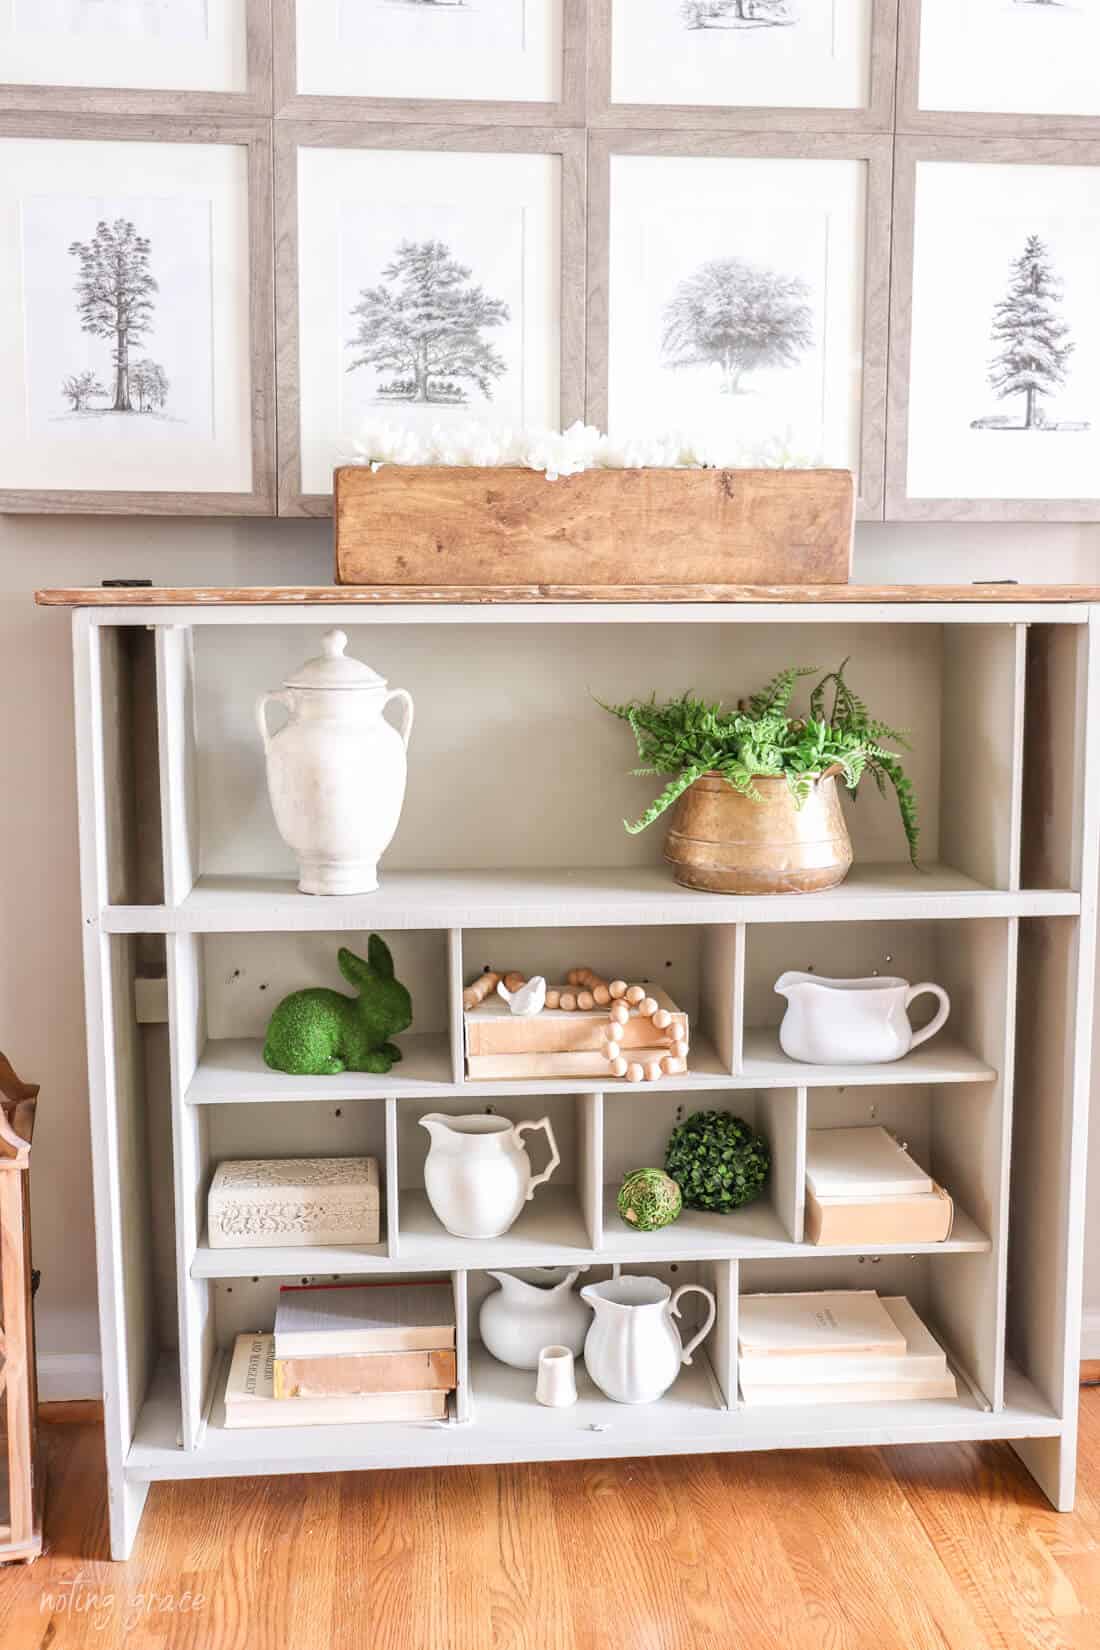 TV cabinet with framed printed artwork. A book case holds vintage books, old creamer pitchers and greenery